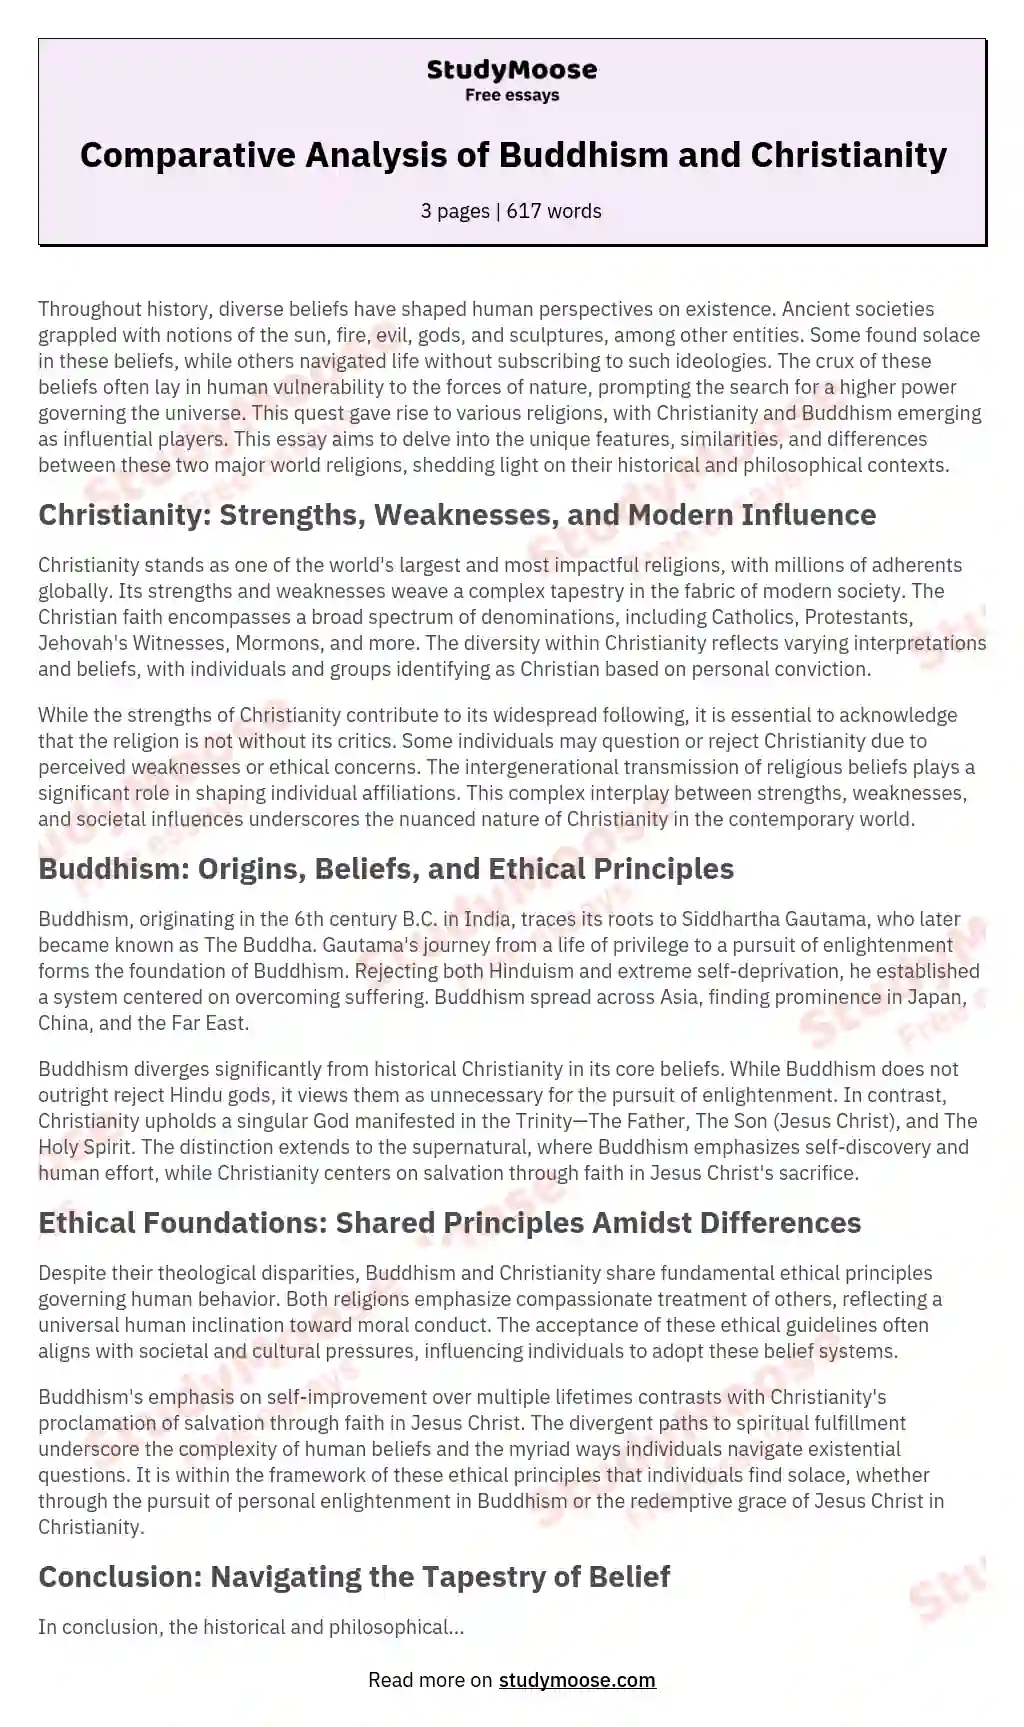 Comparative Analysis of Buddhism and Christianity essay